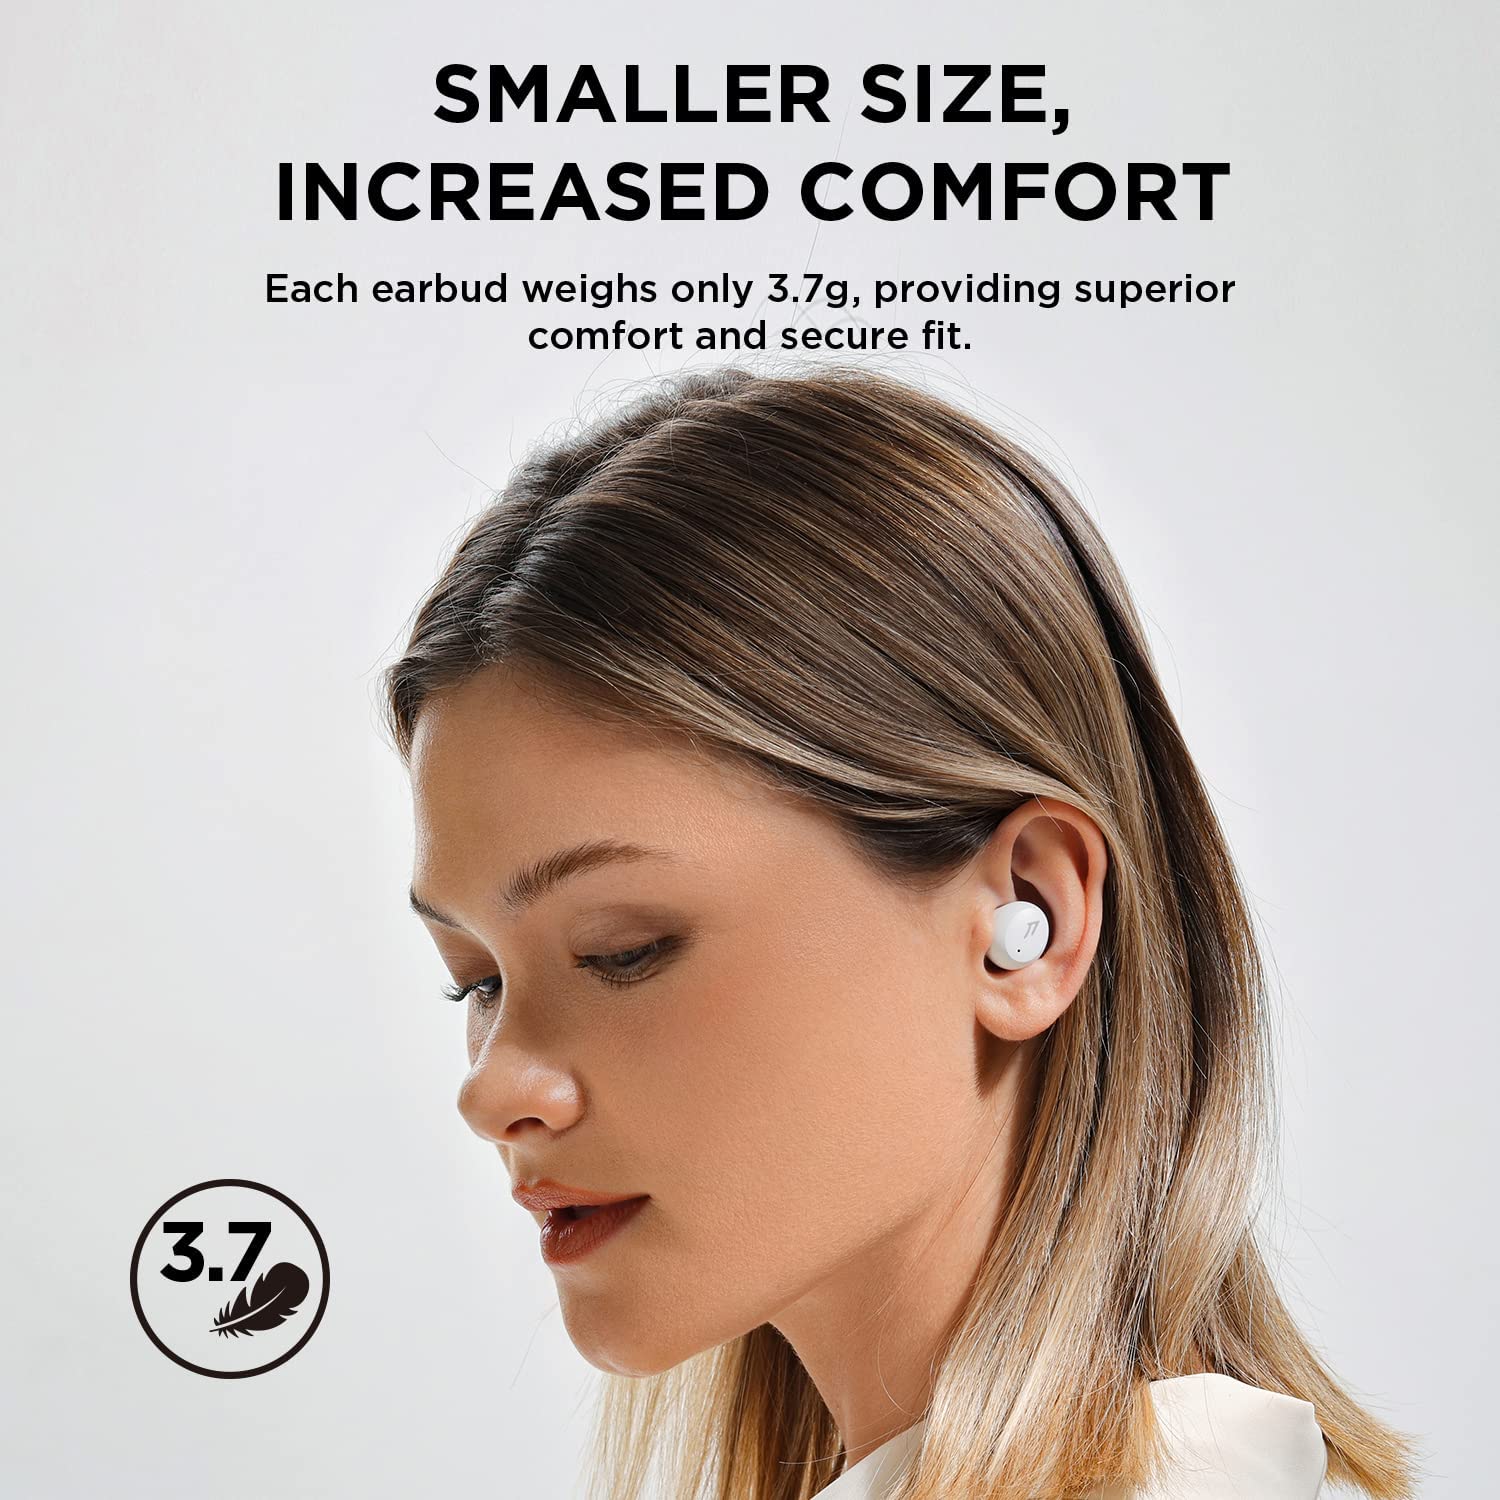 1MORE ComfoBuds Mini Hybrid Active Noise Cancelling Earbuds, In-Ear Headphones with Stereo Sound, Bluetooth 5.2 Headset with 4 Mics, Clear Calls, Wireless Charging, Soothing Sound, Waterproof, White